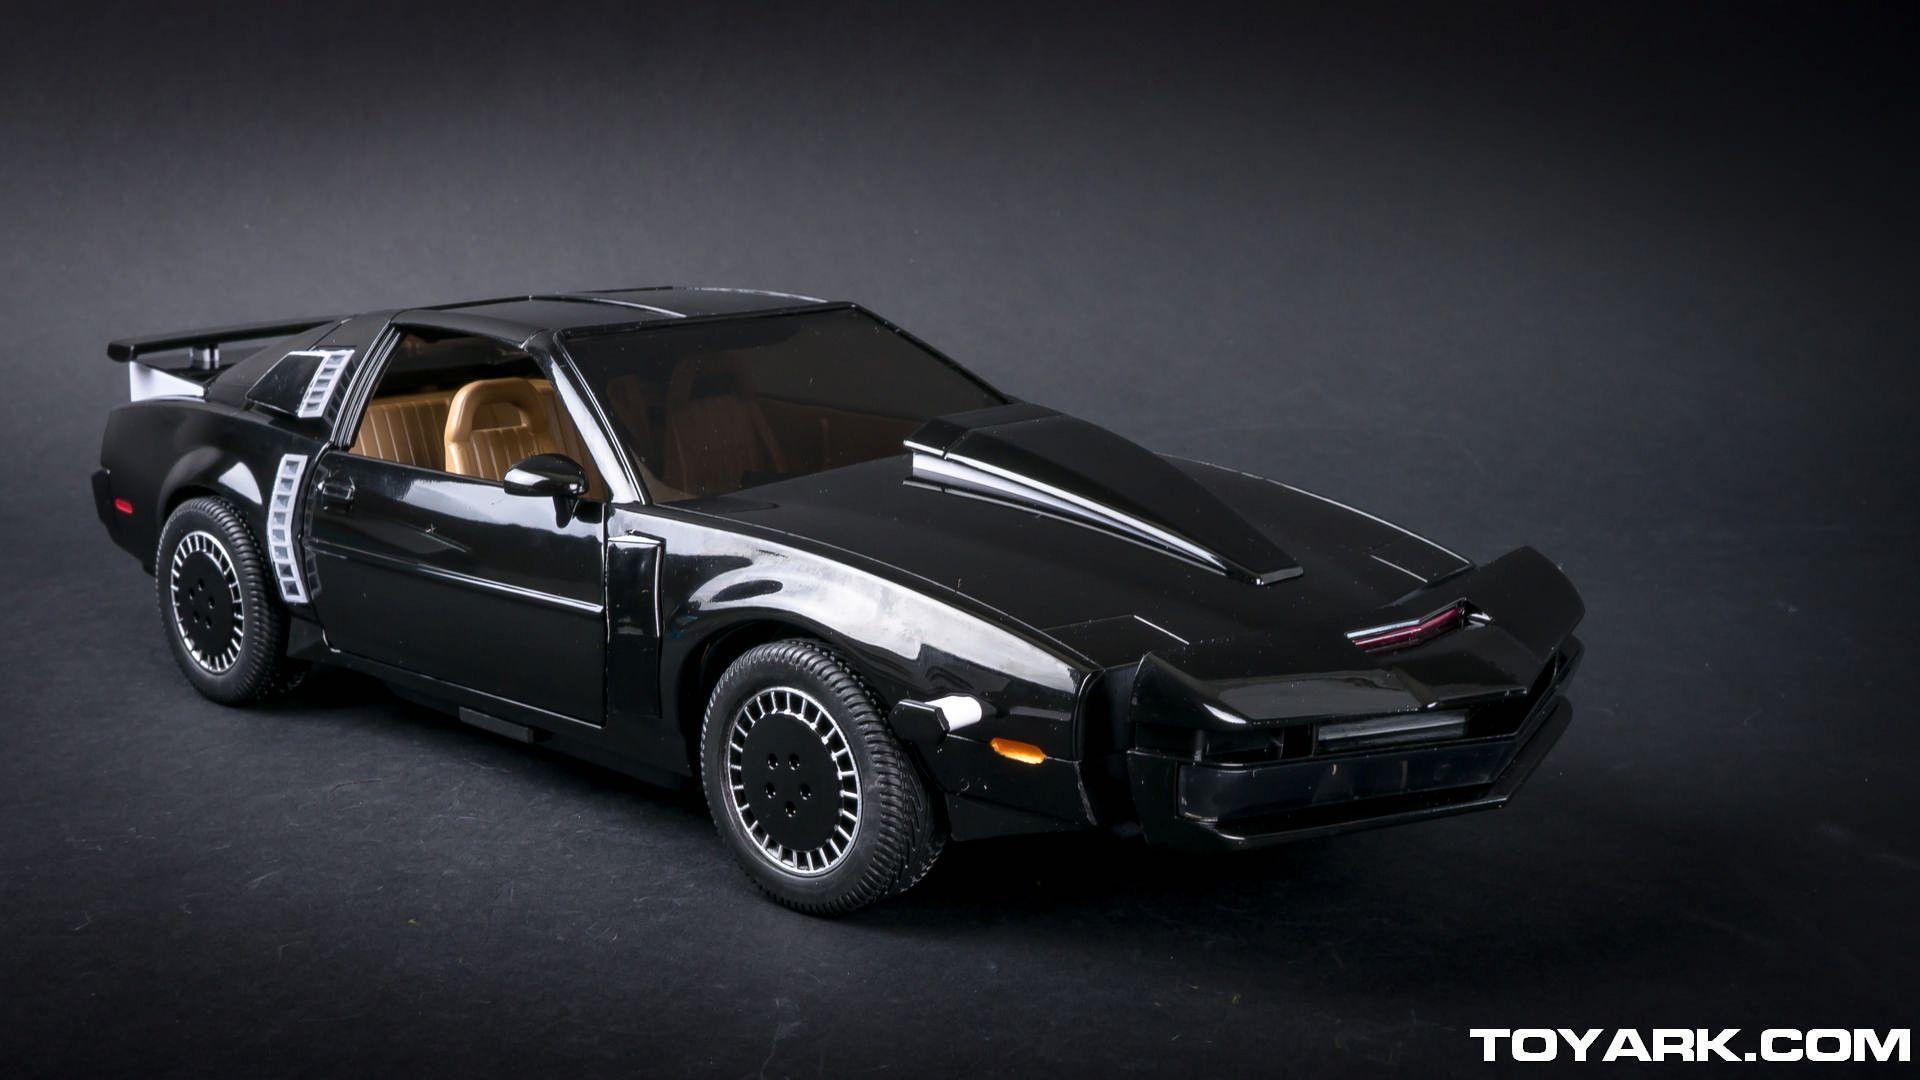 image For > Classic Knight Rider Wallpaper